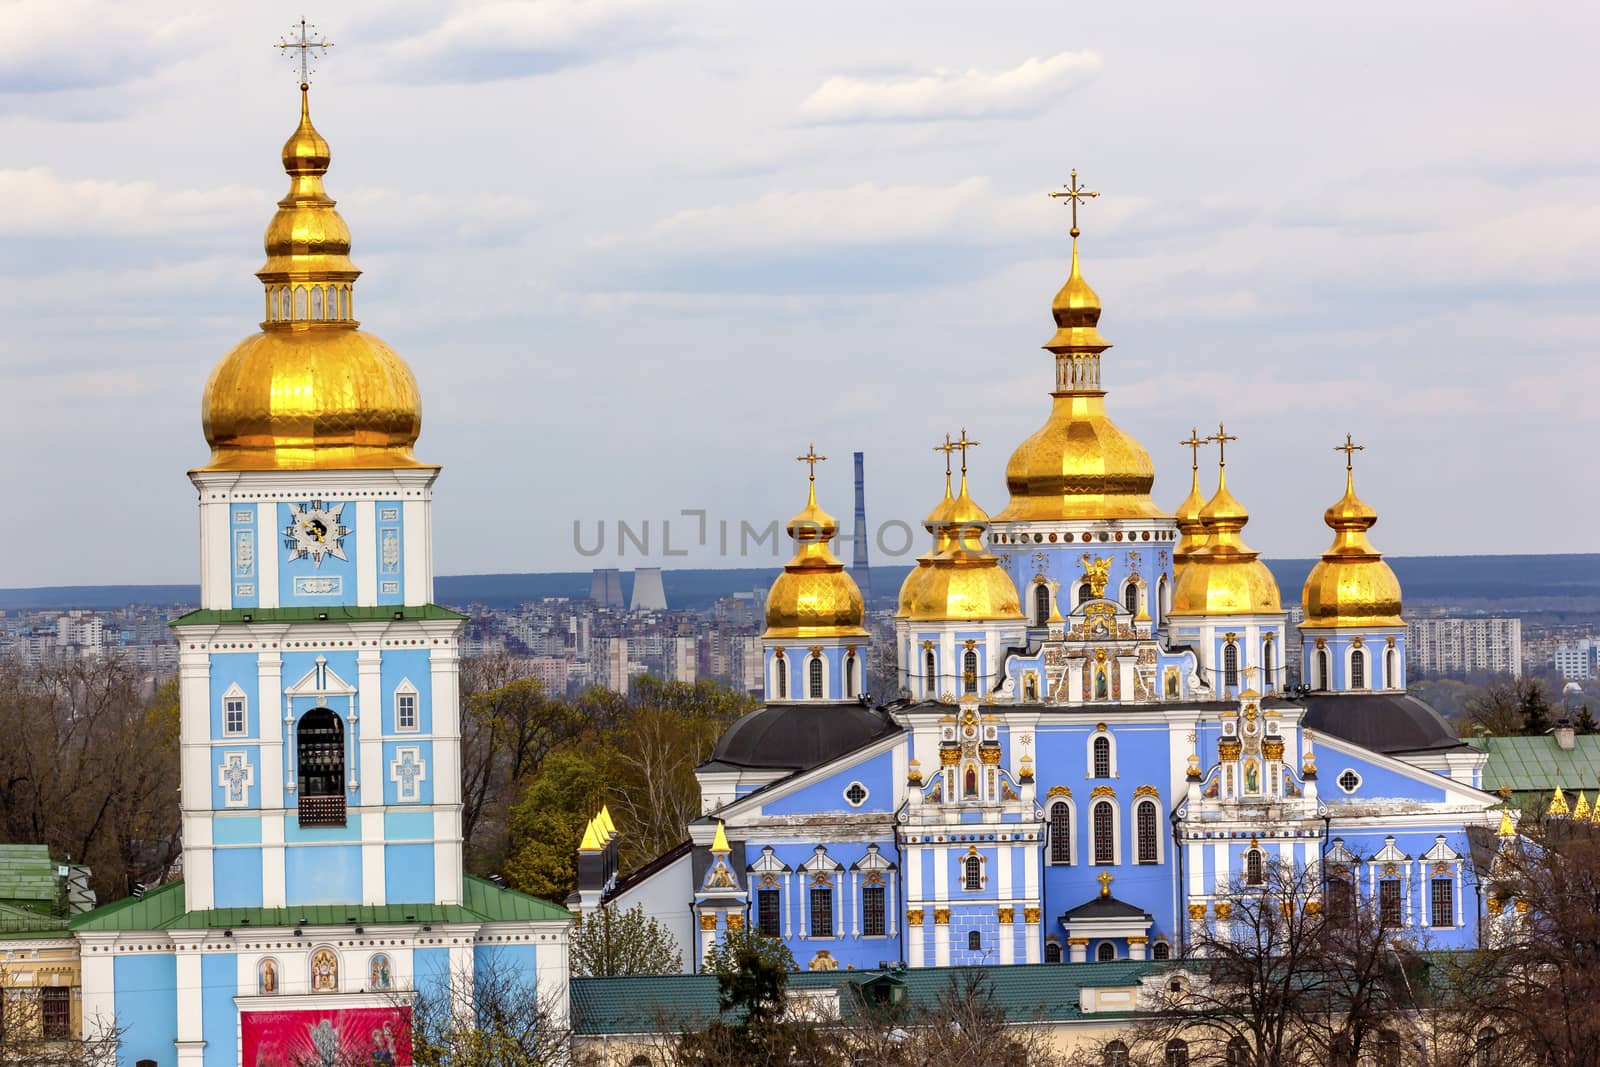 Saint Michael Monastery Cathedral Spires Tower Kiev Ukraine by bill_perry